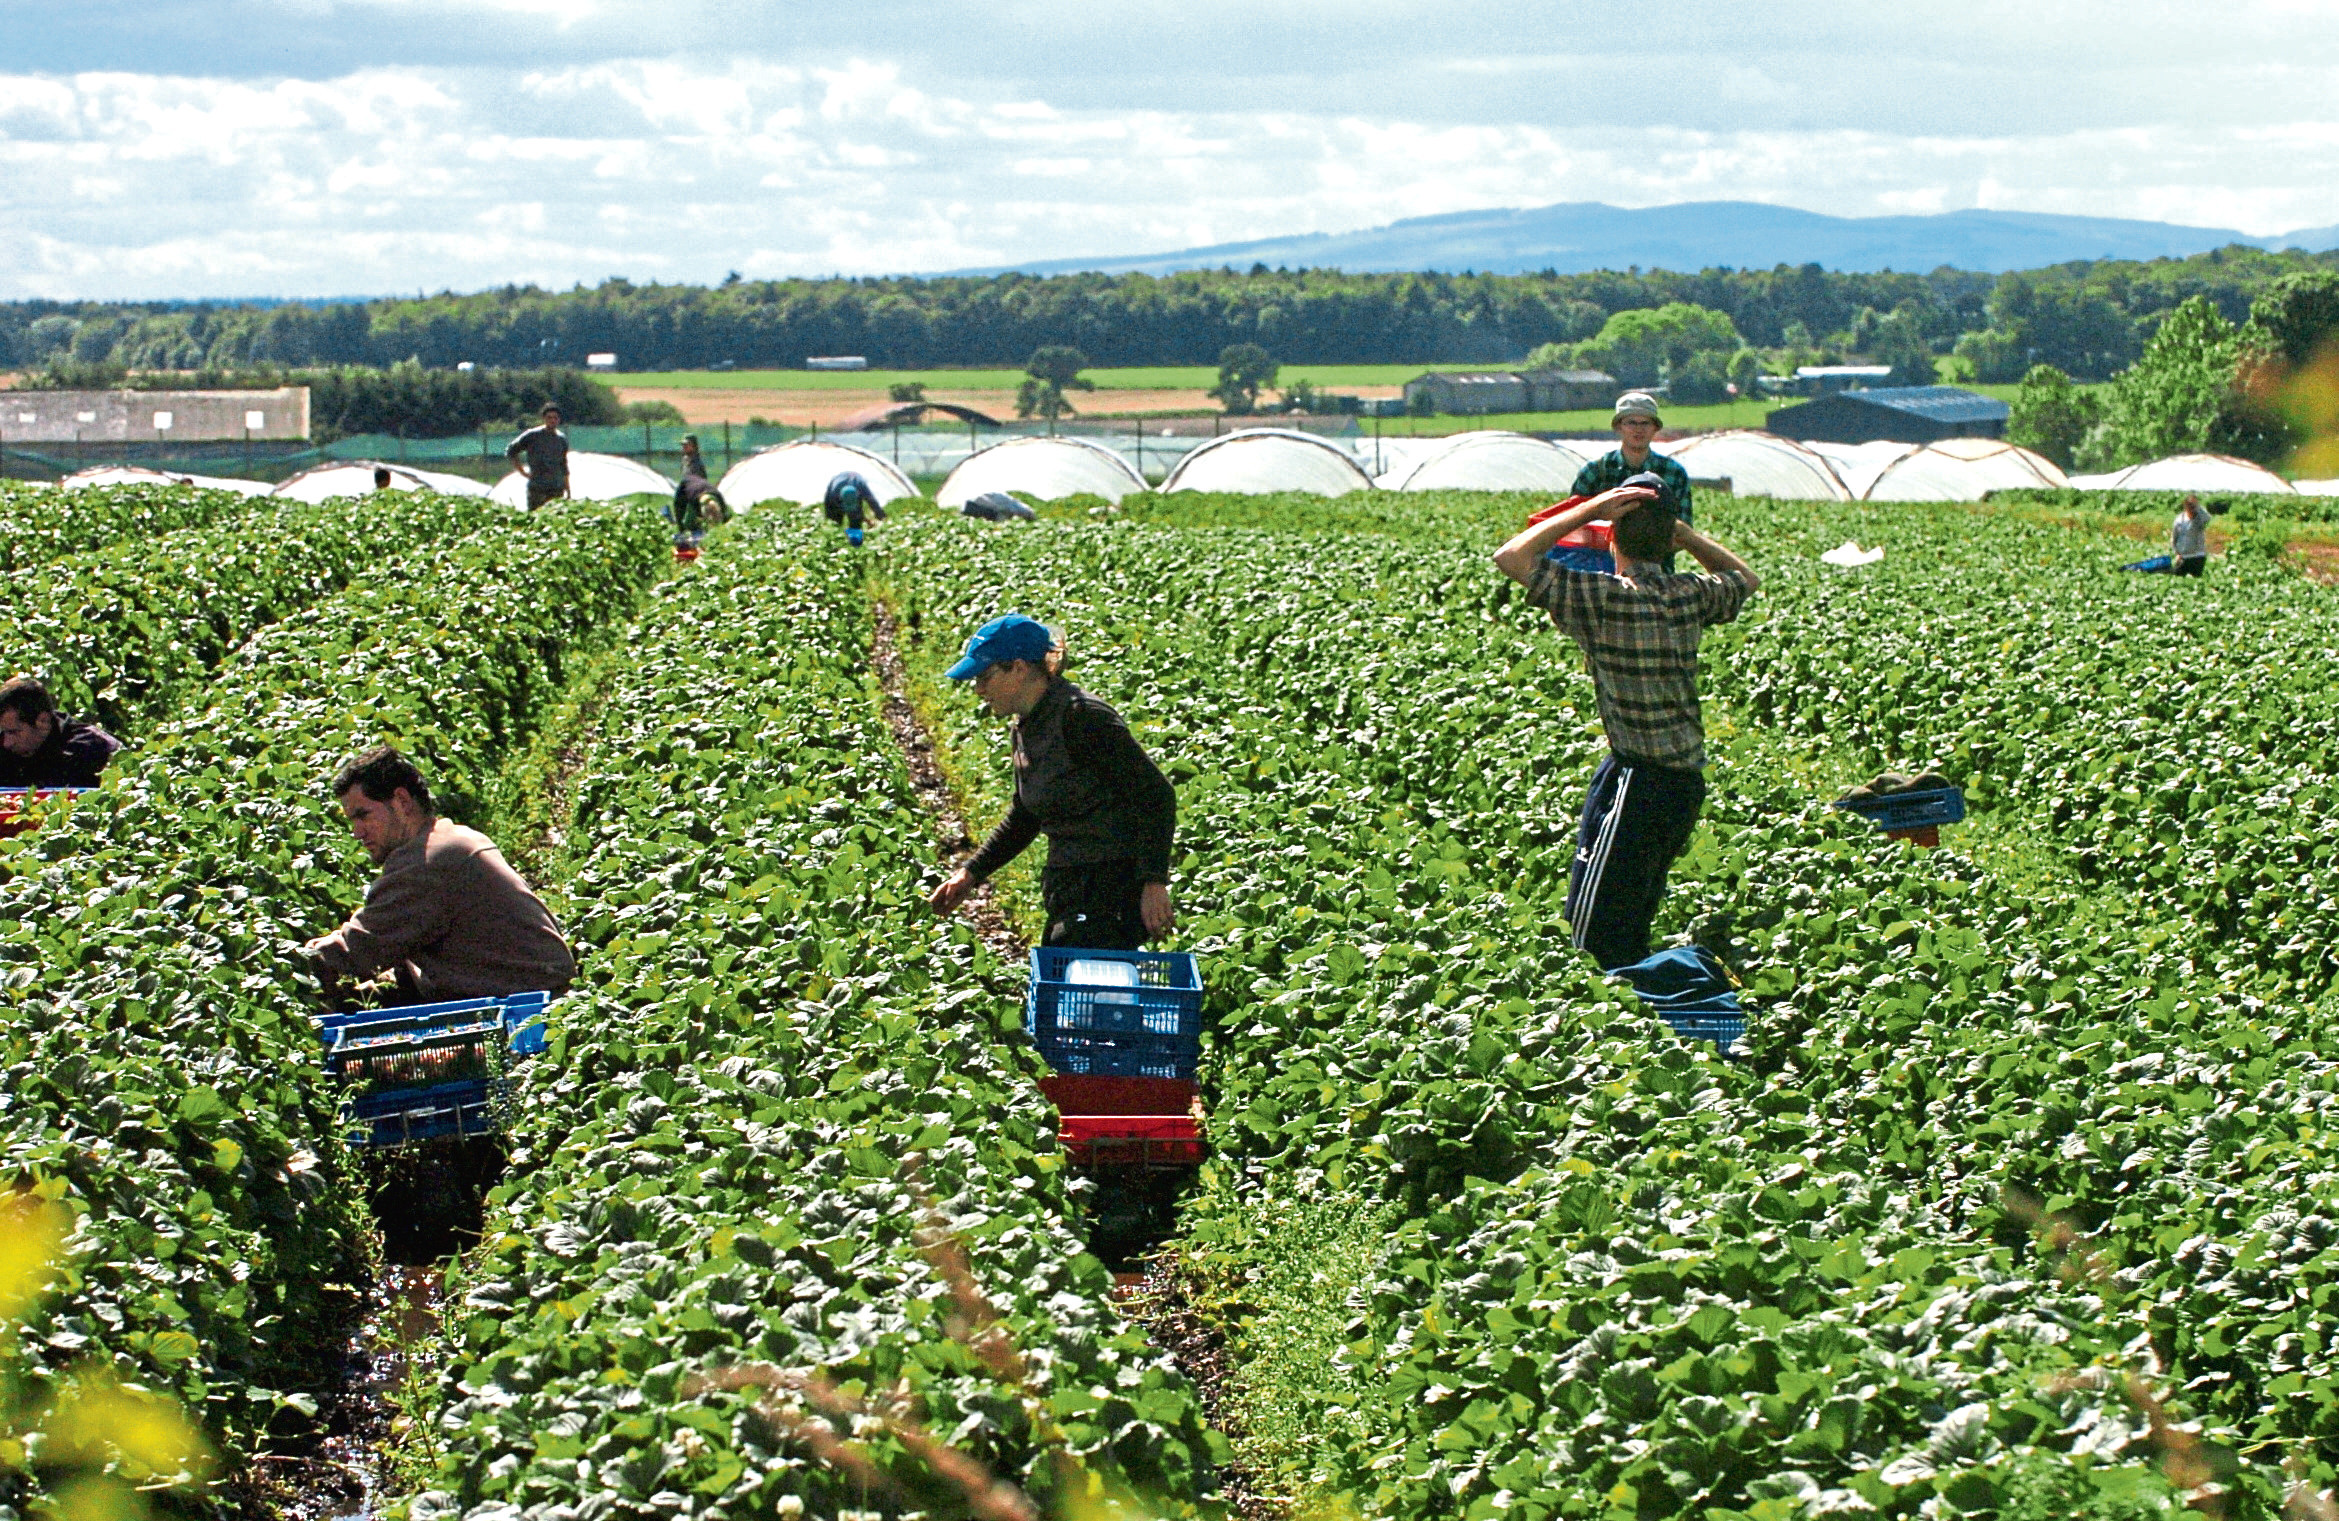 More than 9,000 migrant seasonal workers were needed on Scottish farms last year.